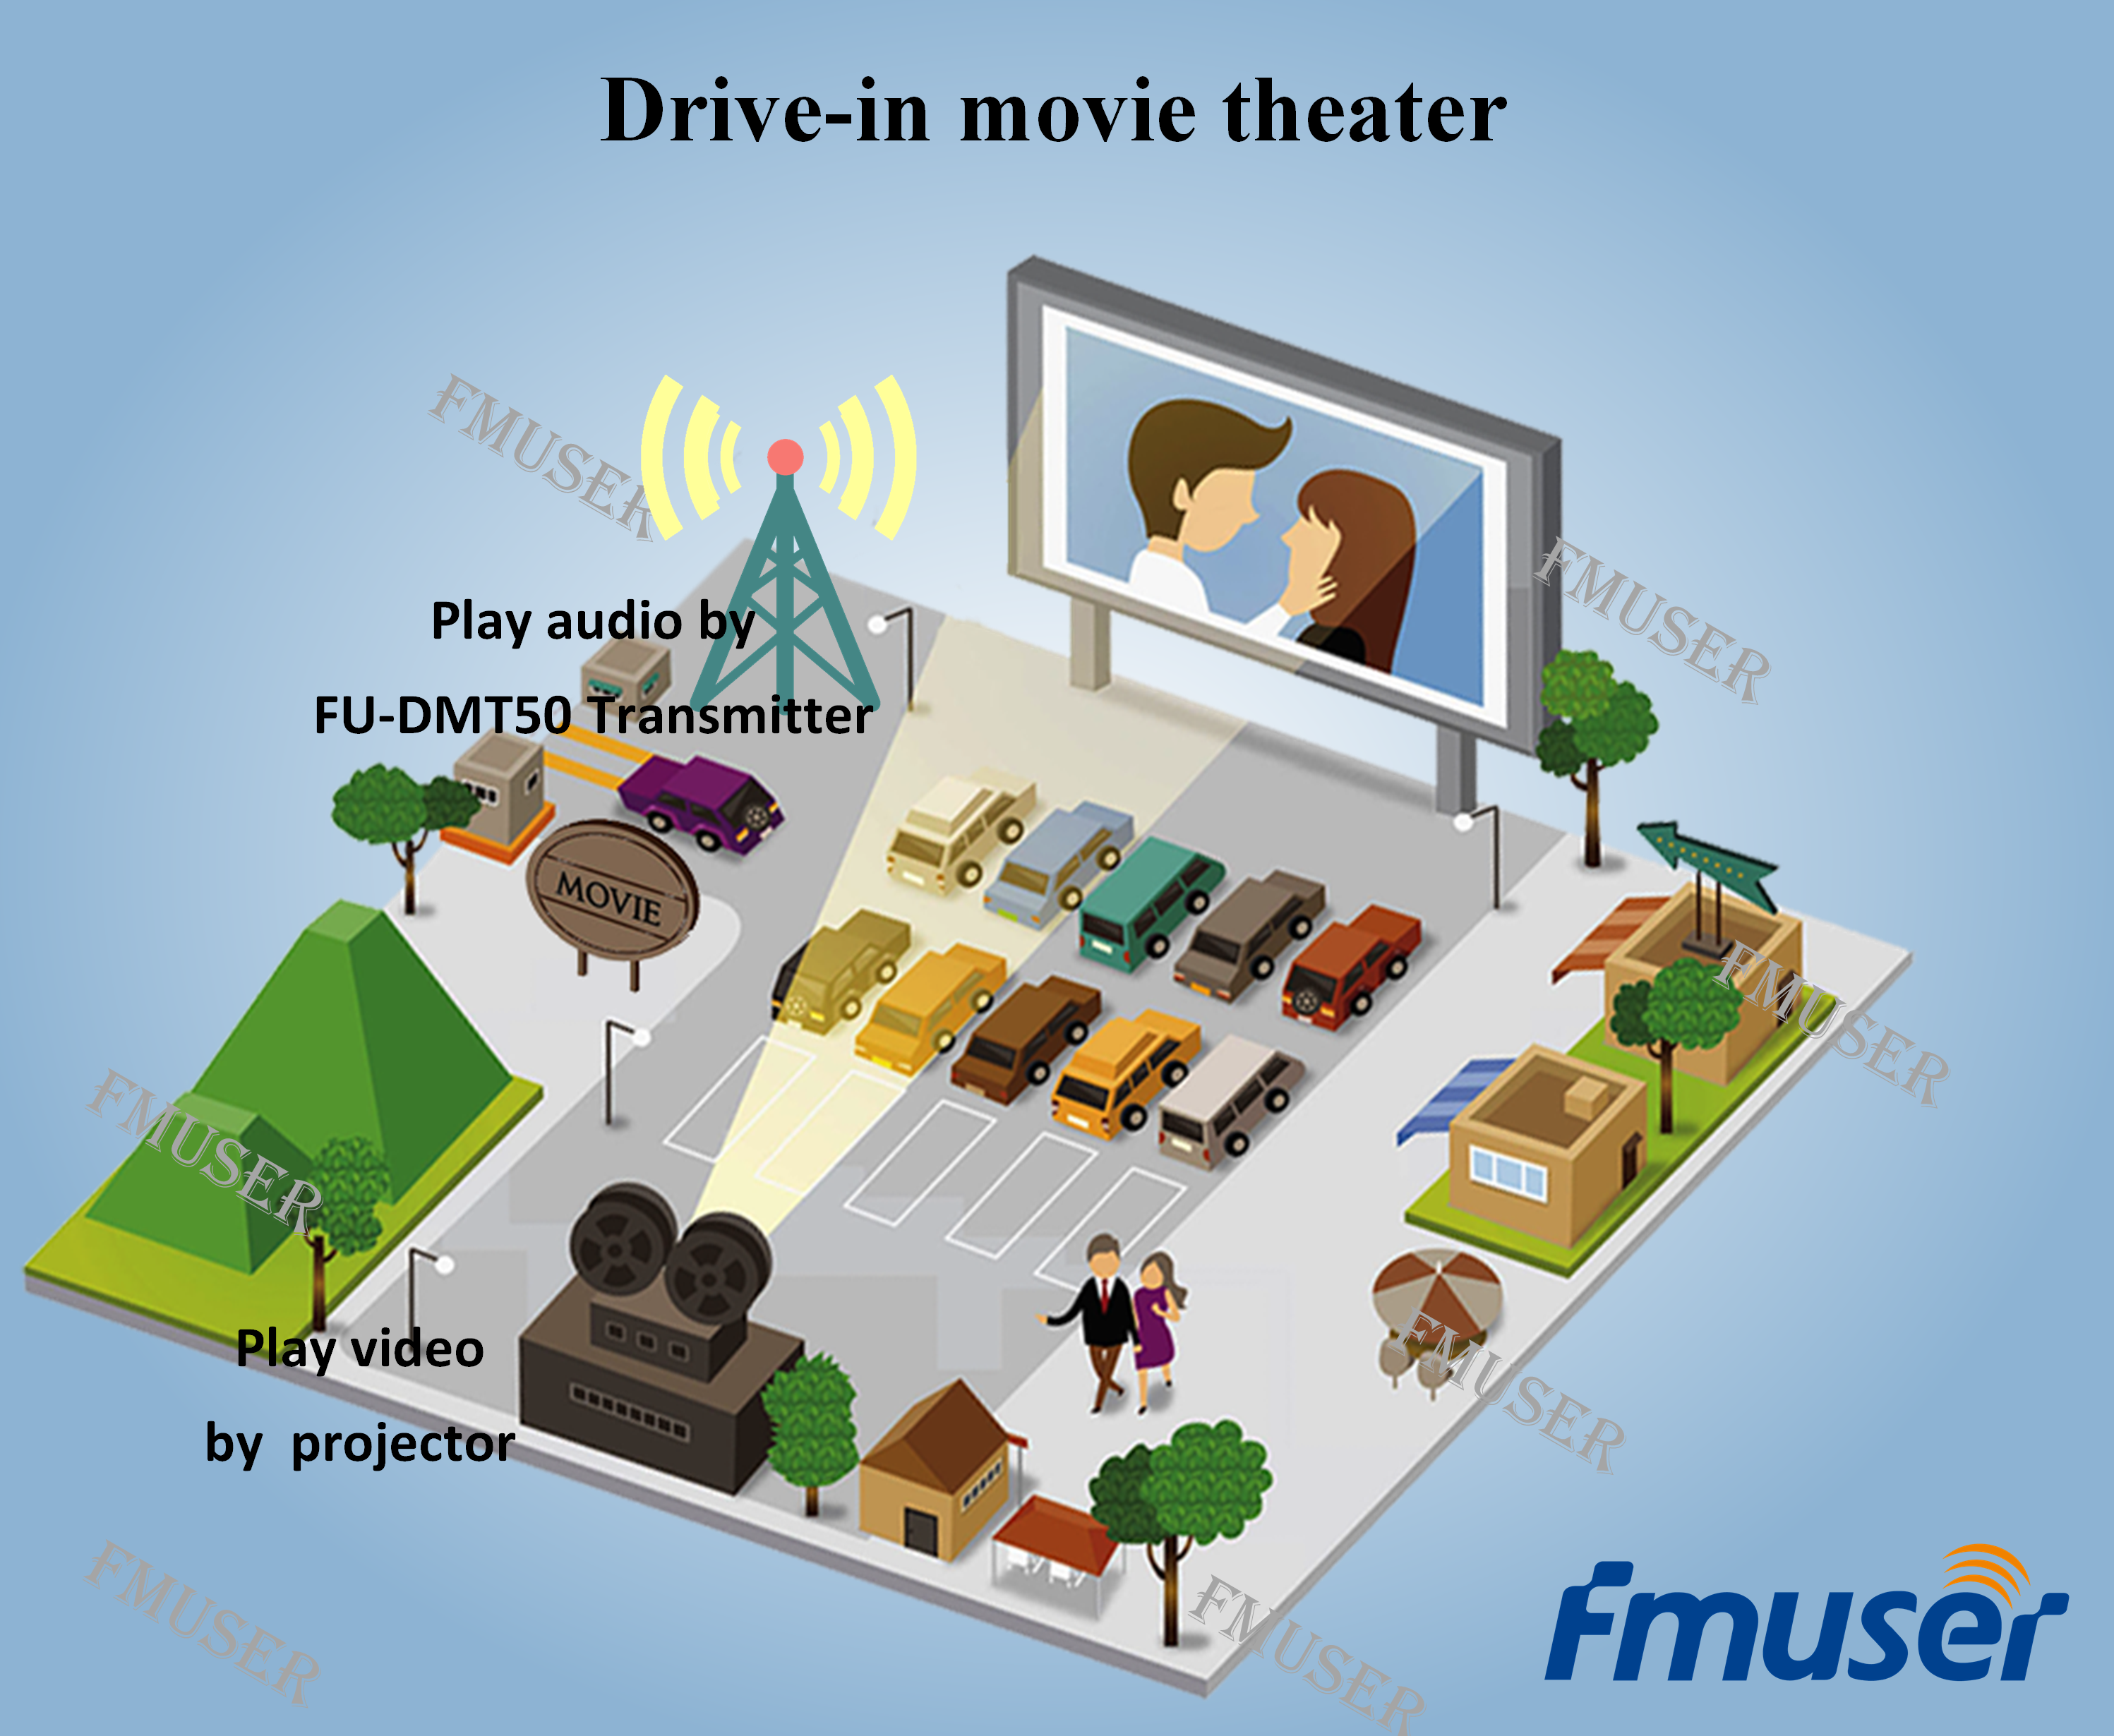 8 Things One Cannot Miss About Drive-in Movie Theaters